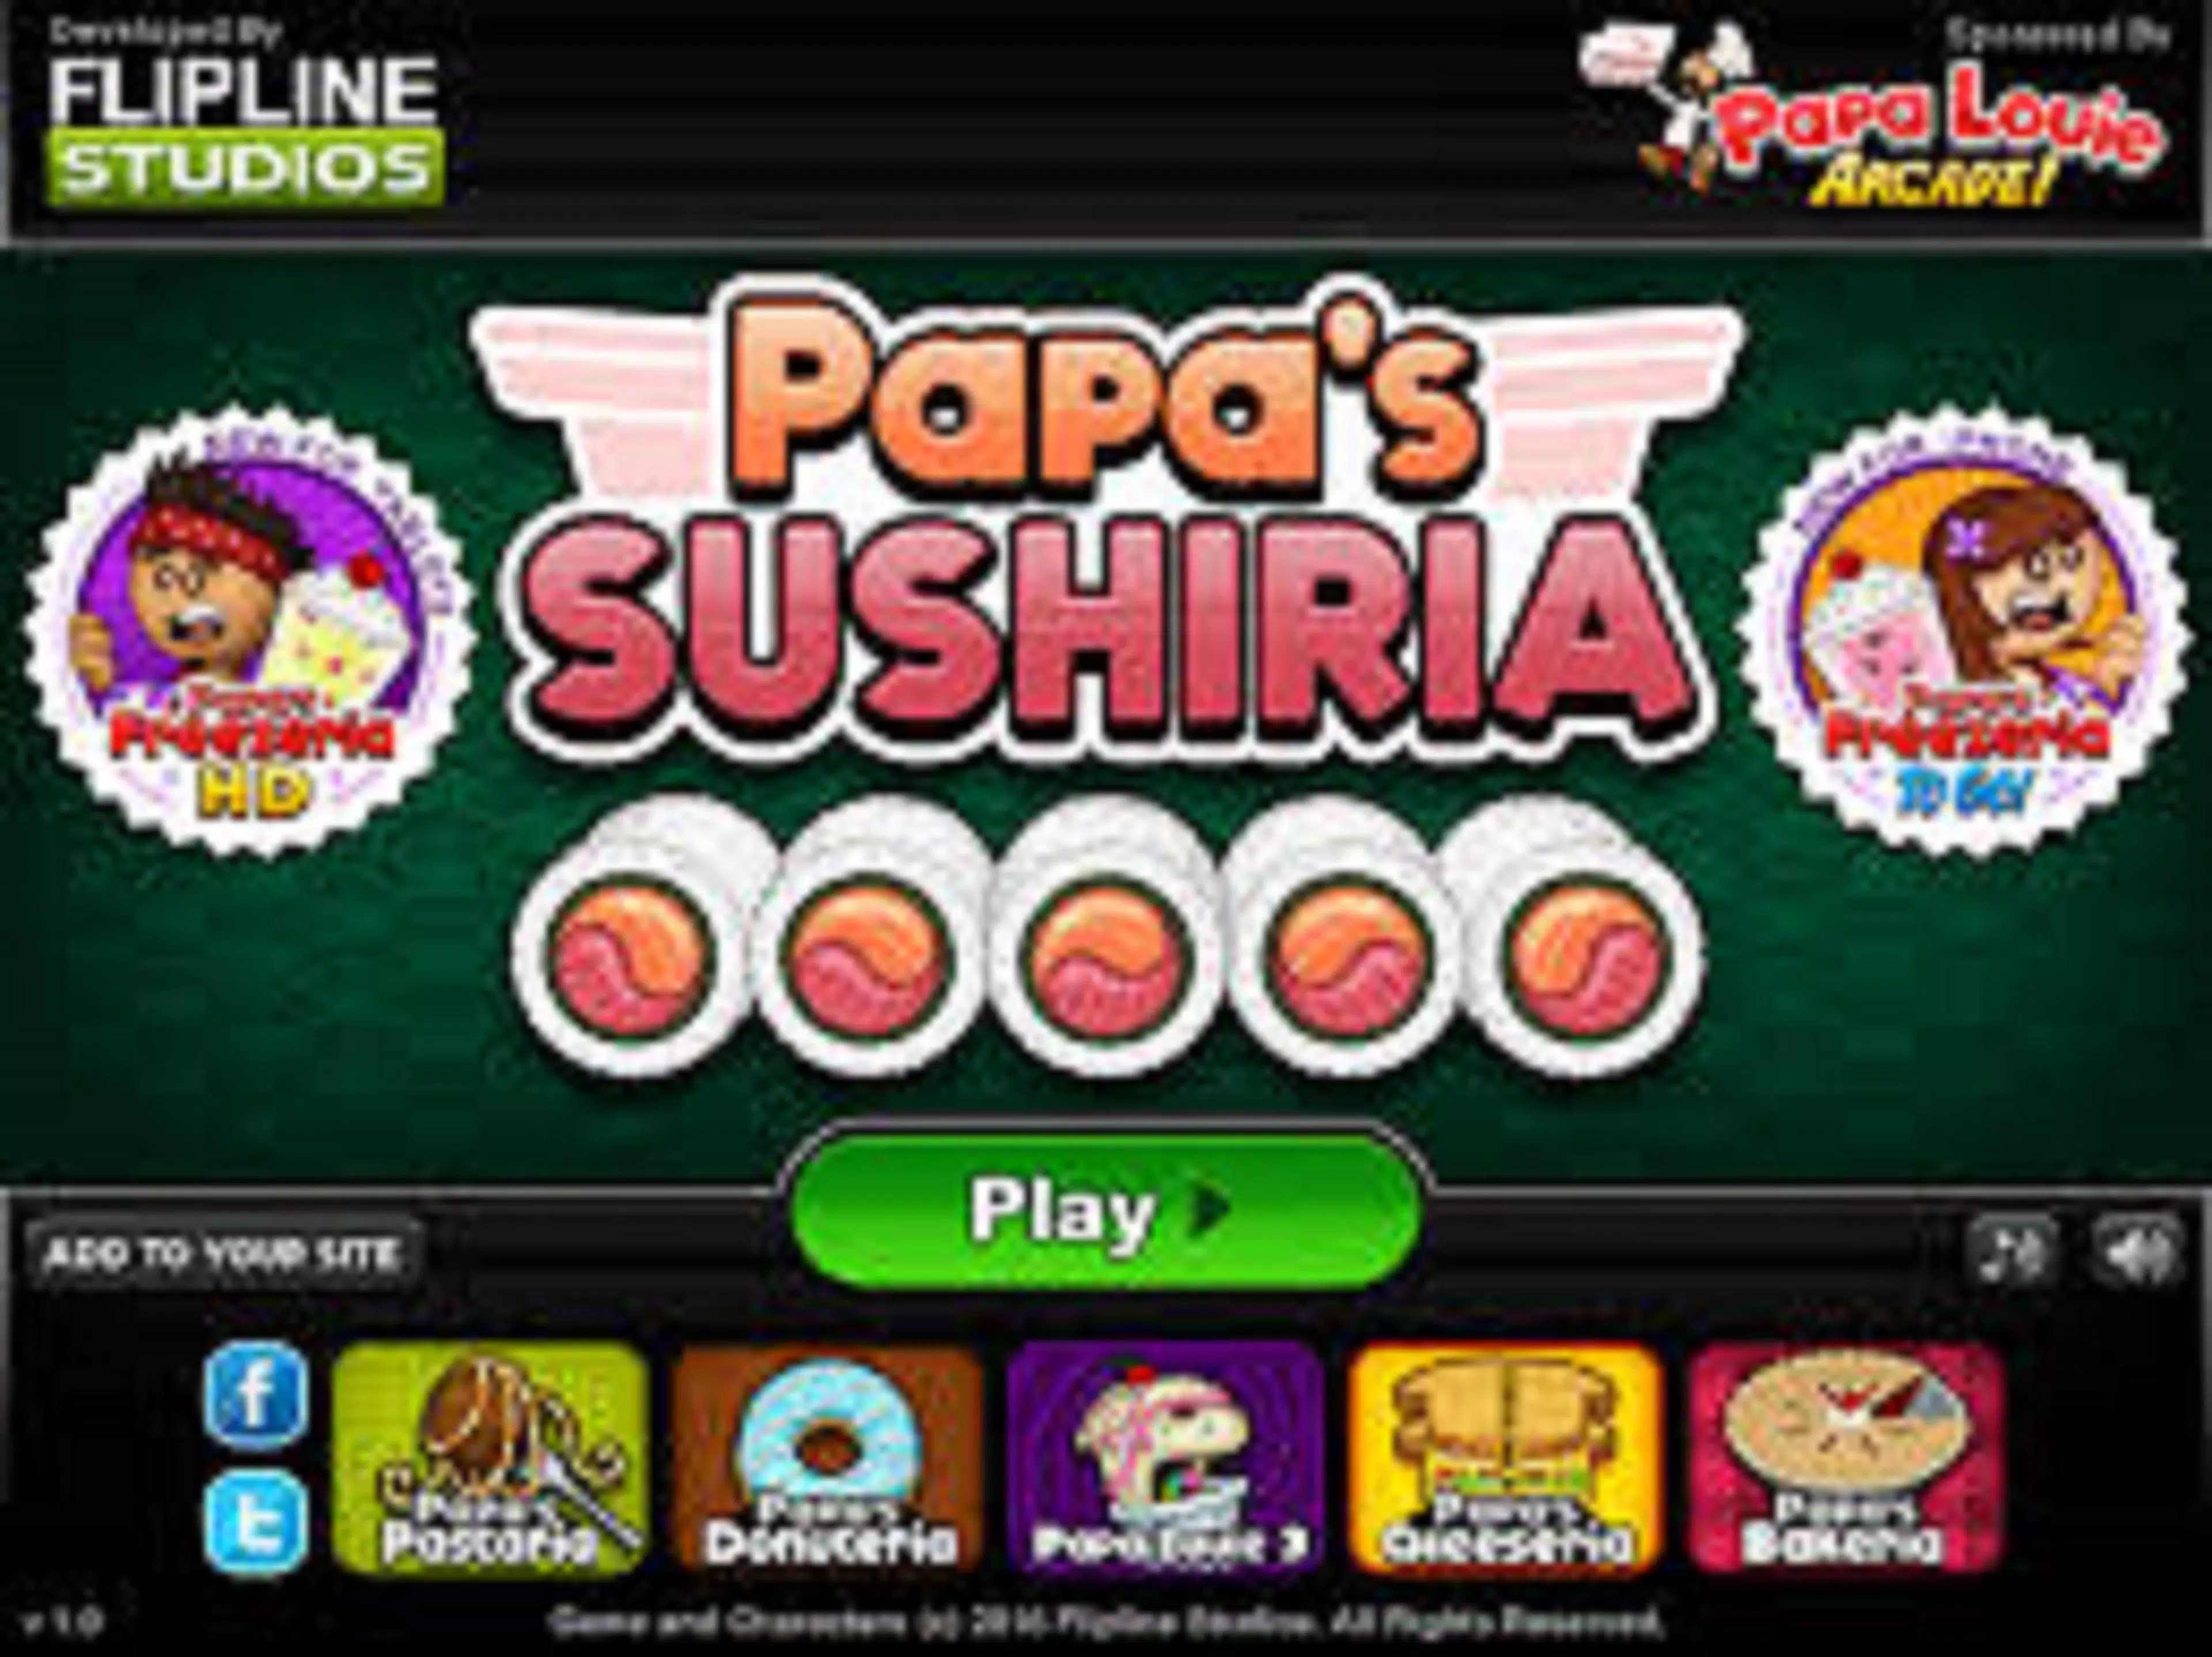 Papa's Sushiria To Go! APK 1.0.1 - Download Free for Android